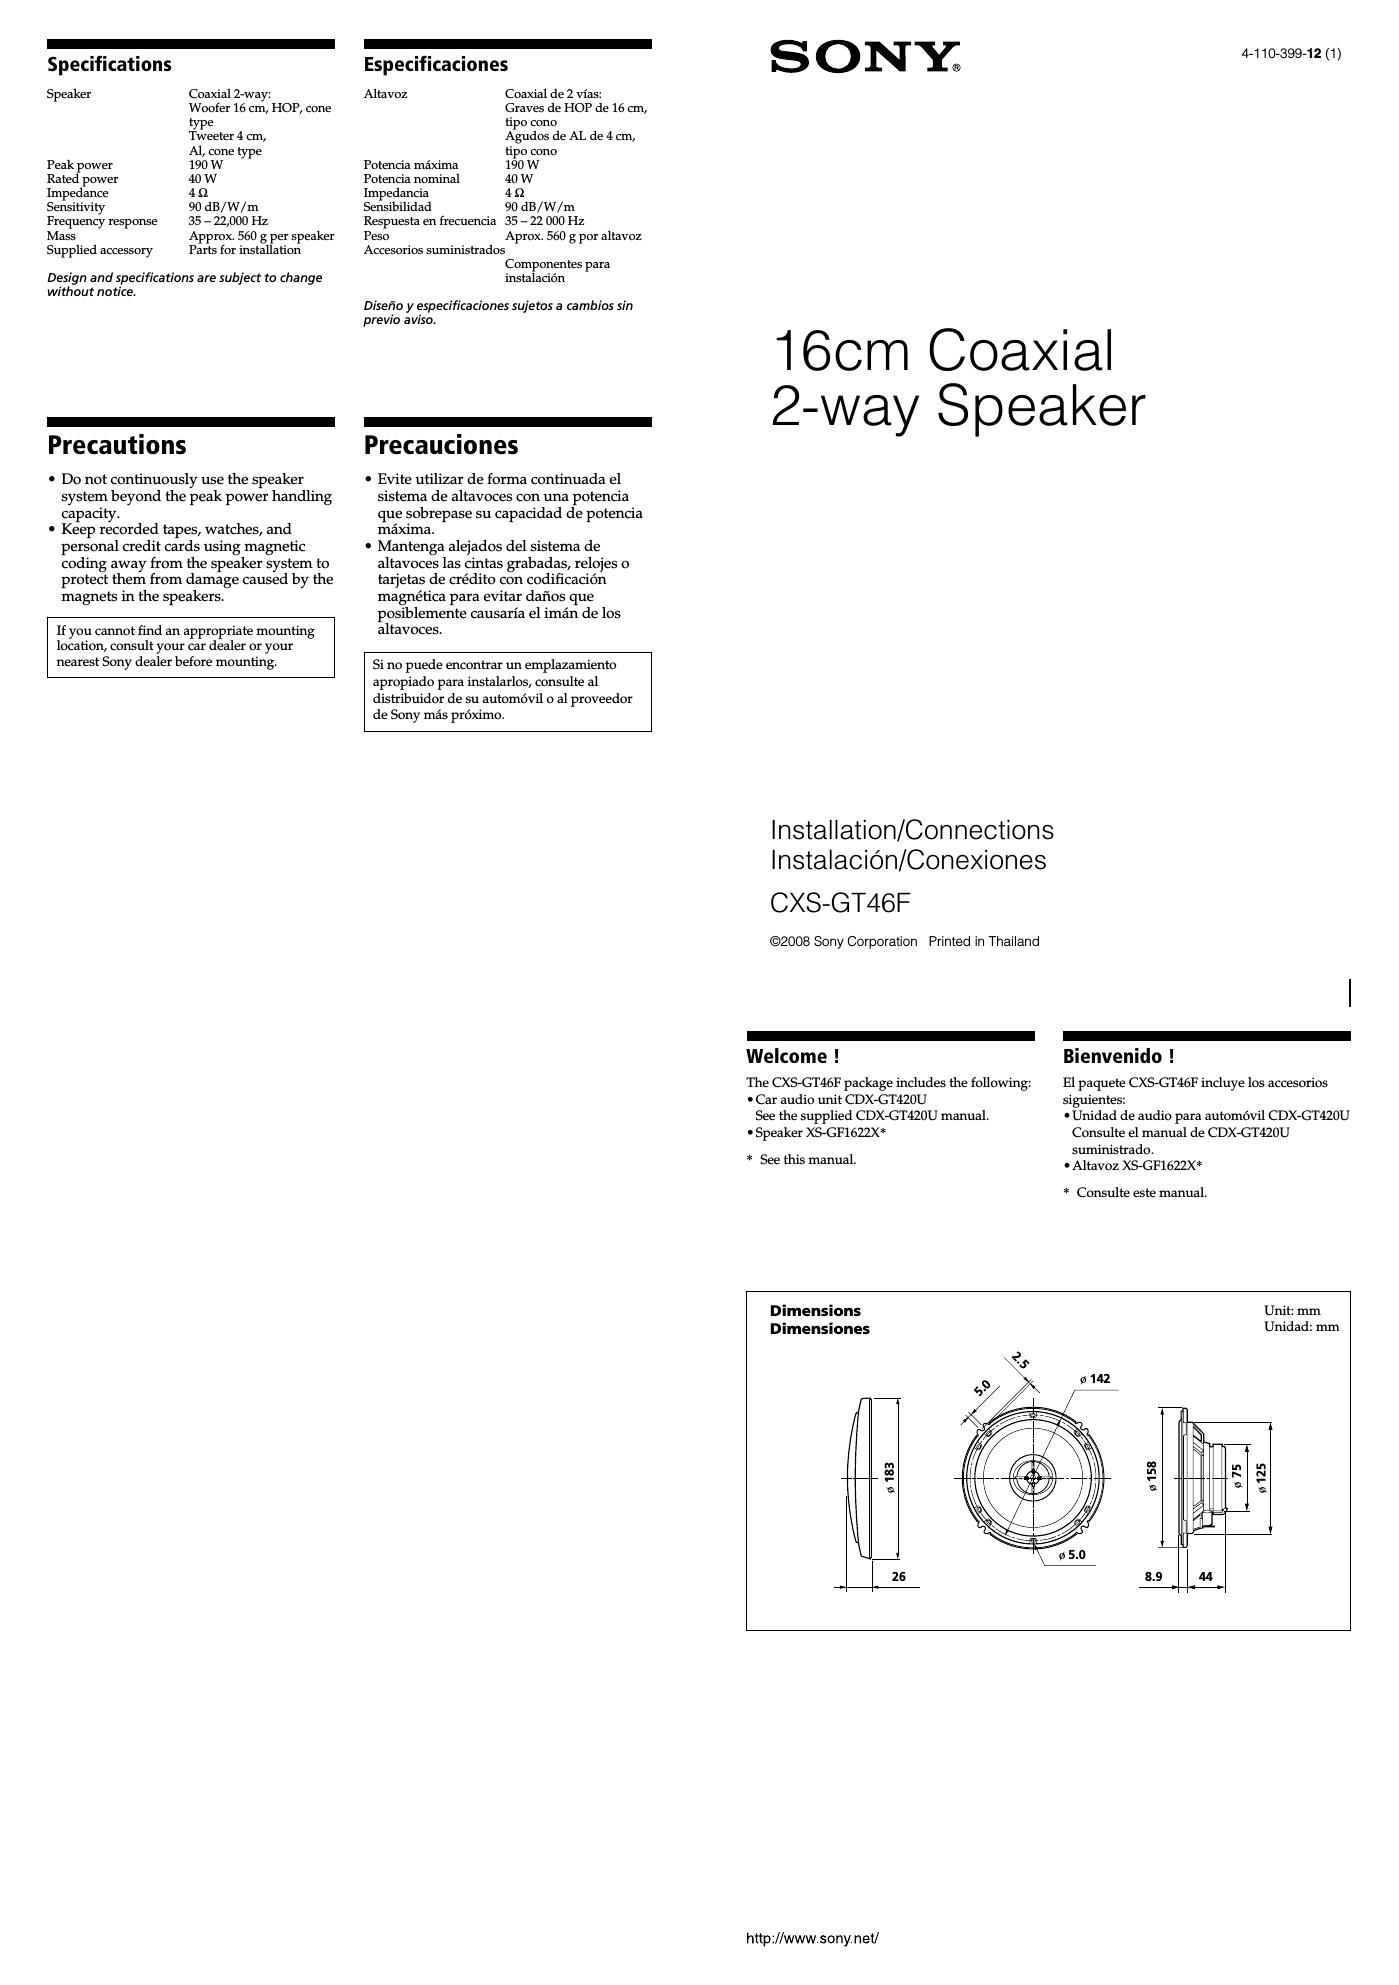 sony cxs gt 46 f owners manual